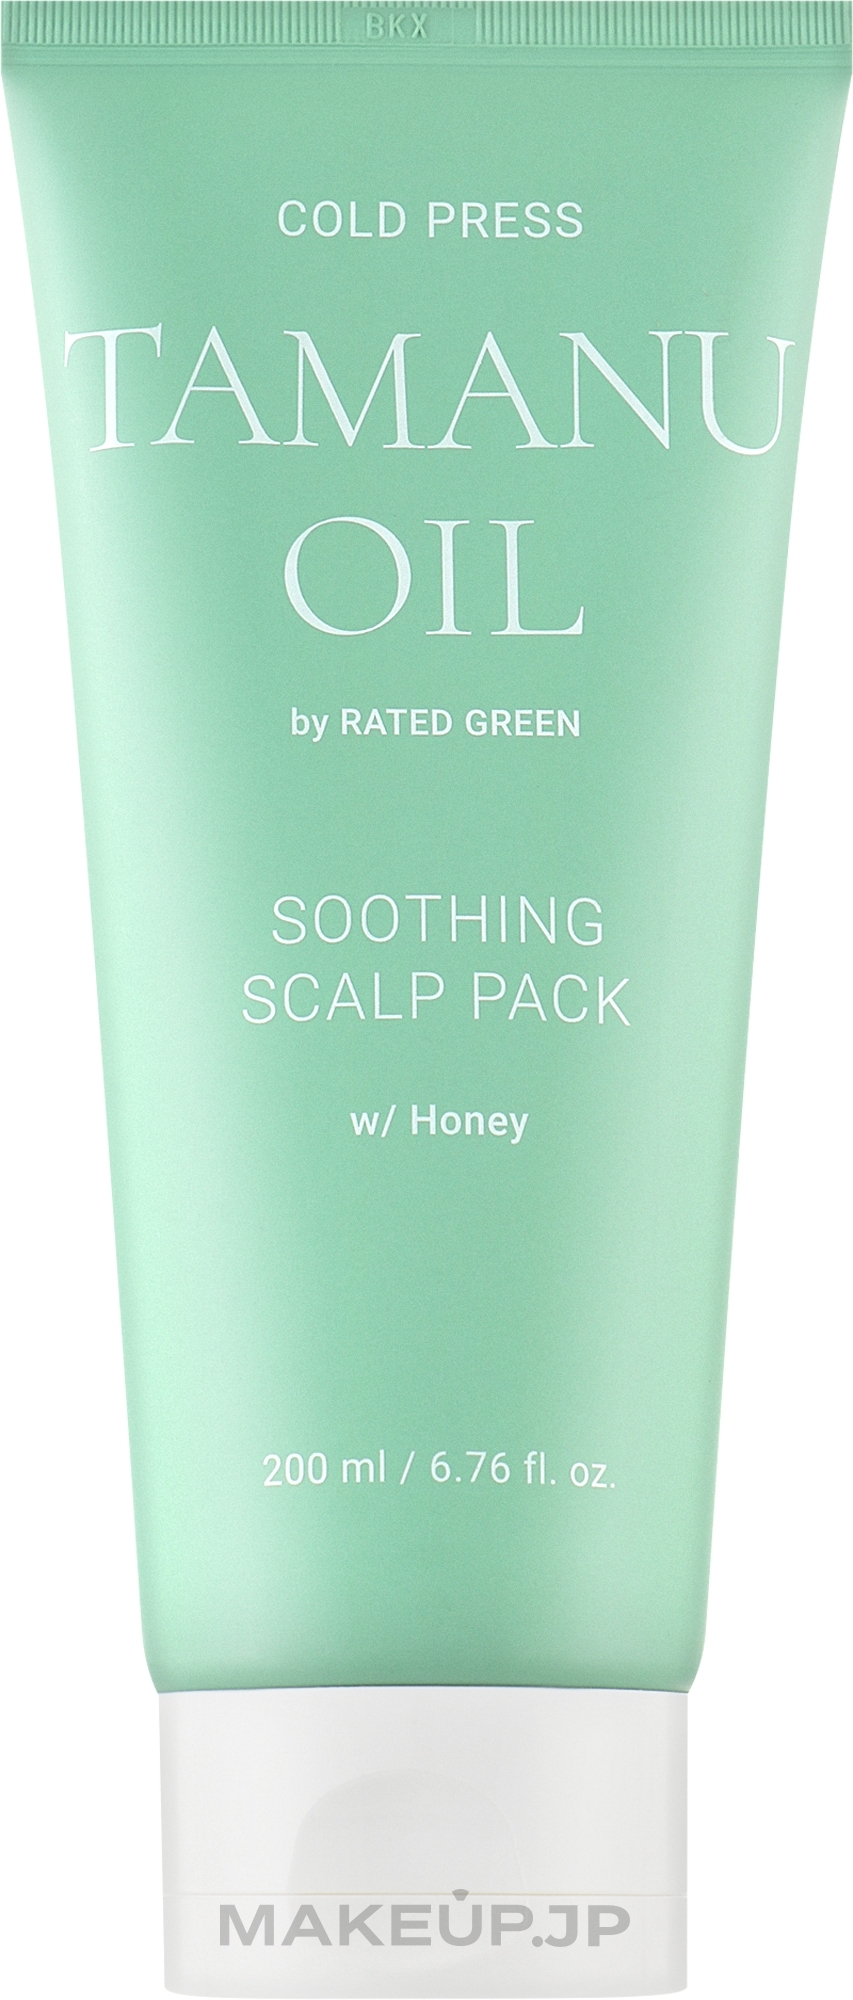 Soothing Scalp Mask with Tamanu & Black Currant Oil - Rated Green Cold Press Tamanu Oil Soothing Scalp Pack (tube) — photo 200 ml